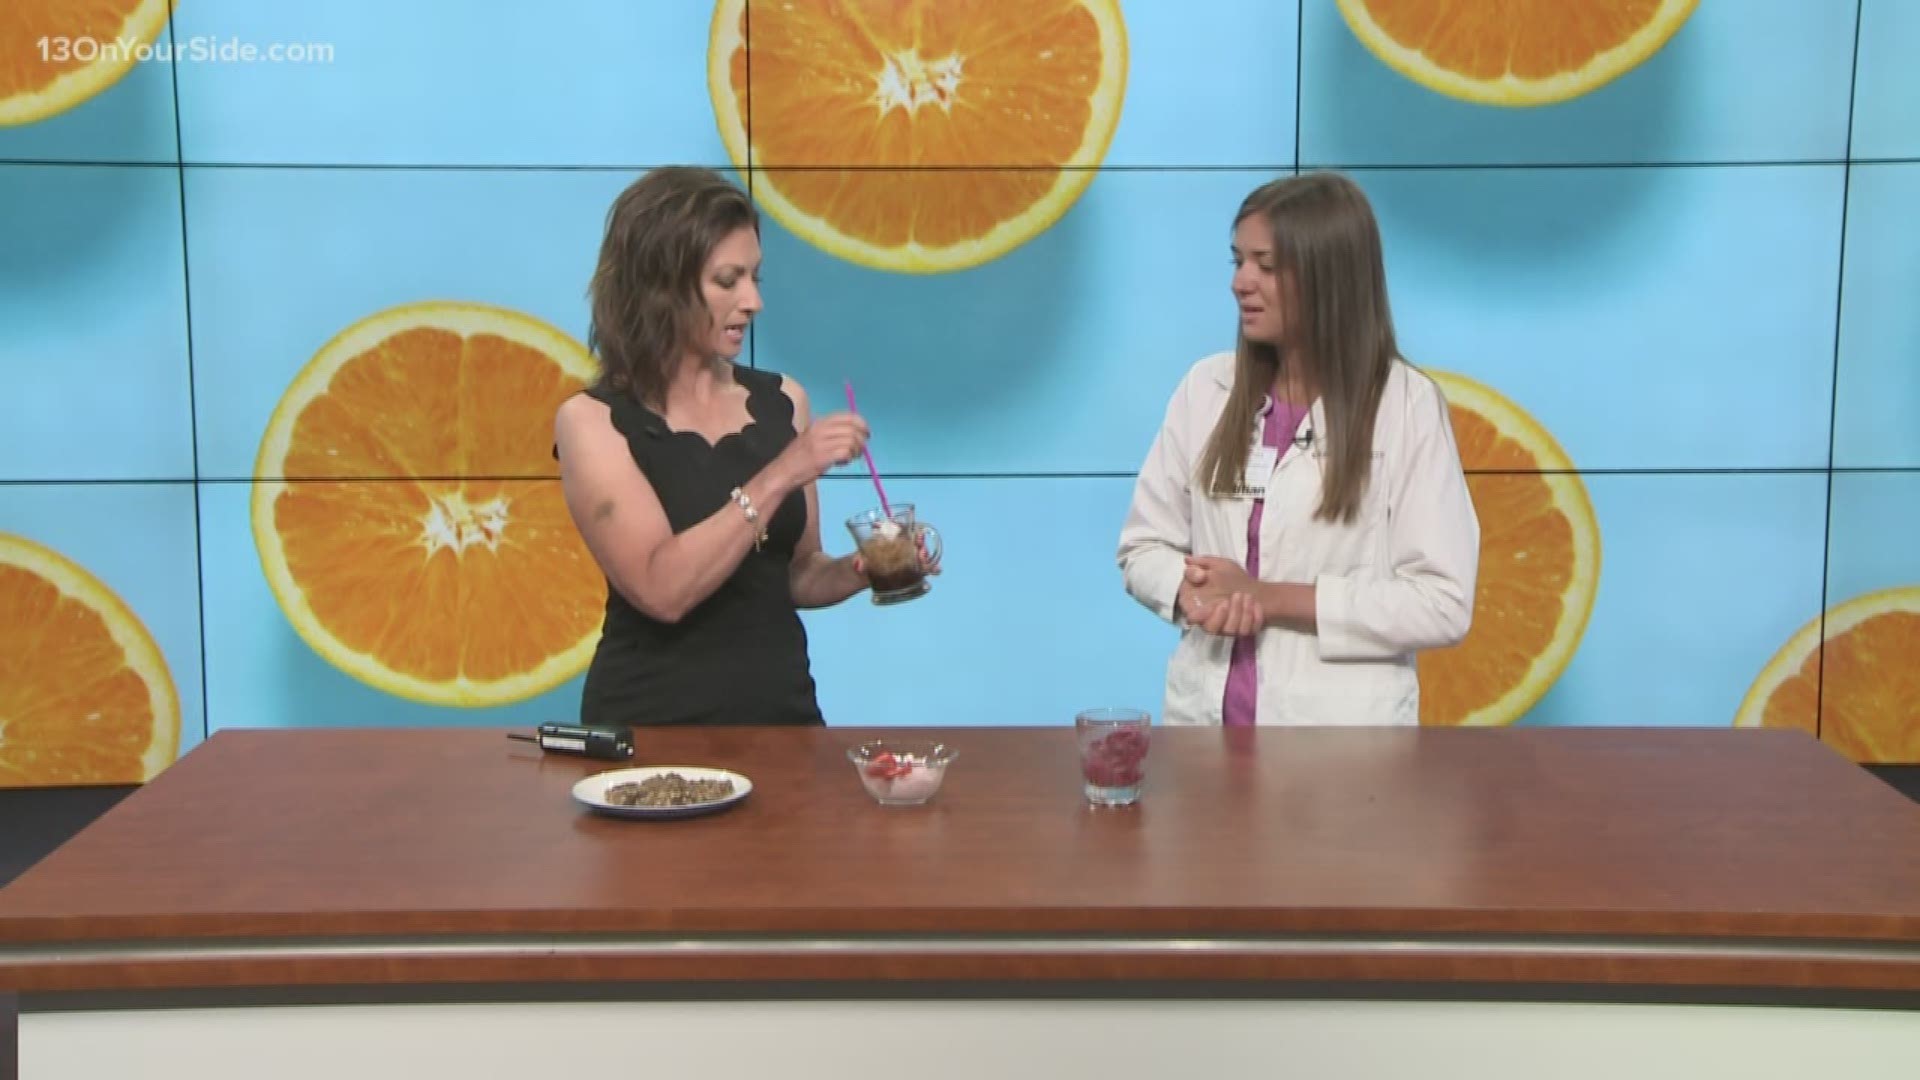 Making a good treat to satisfy your sweet tooth does not mean you have to sacrifice your health doing it. Mercy Health Registered Dietitian Rebecca Serra, RD, shares some key points on simple, low calorie, nutritious desserts that require only five ingredients or less.